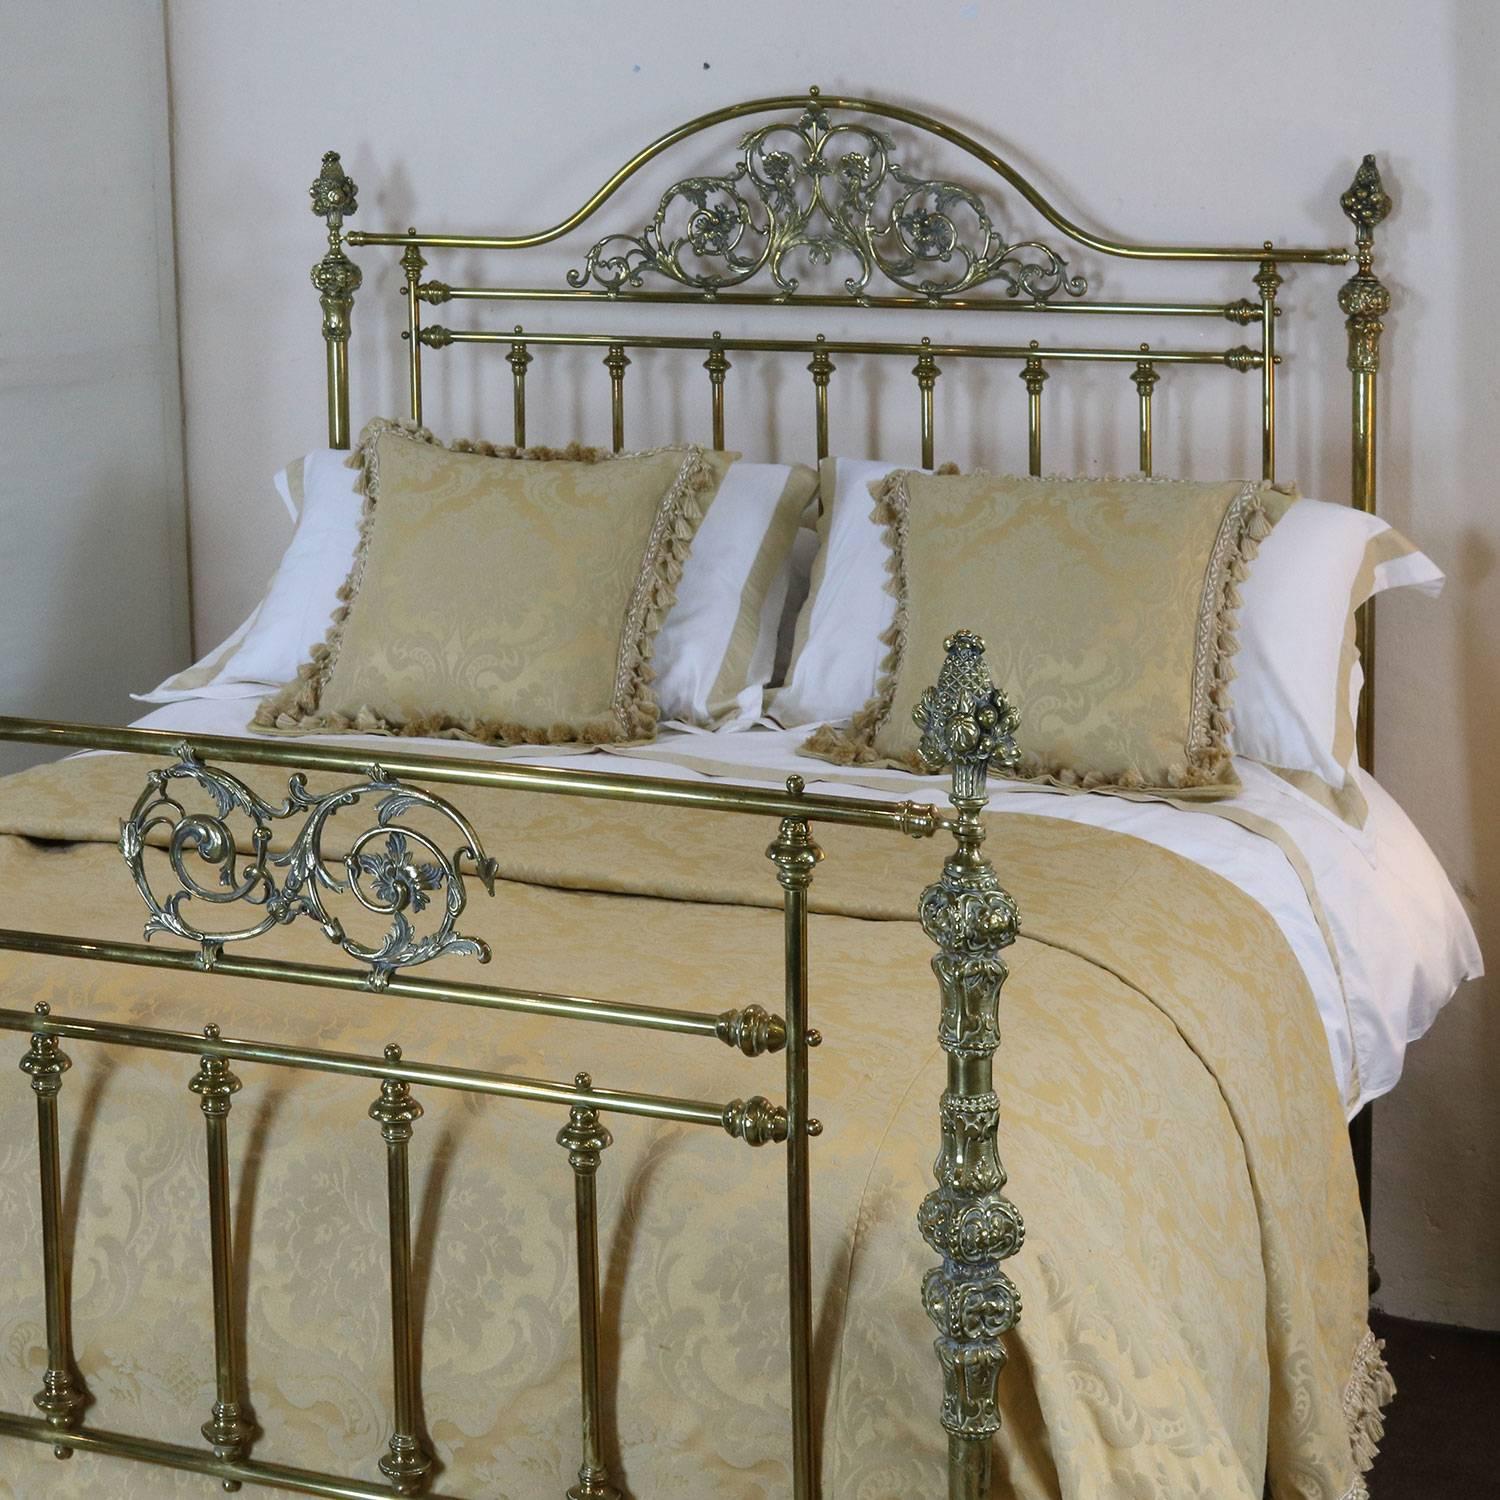 A superb all brass bedstead with decorative fittings and serpentine top rail on the head panel. A fine and rare example. MK91.

The brass is unpolished, with a faded patina. We can polish the bed if you wish, please inquire.

This bed accepts a